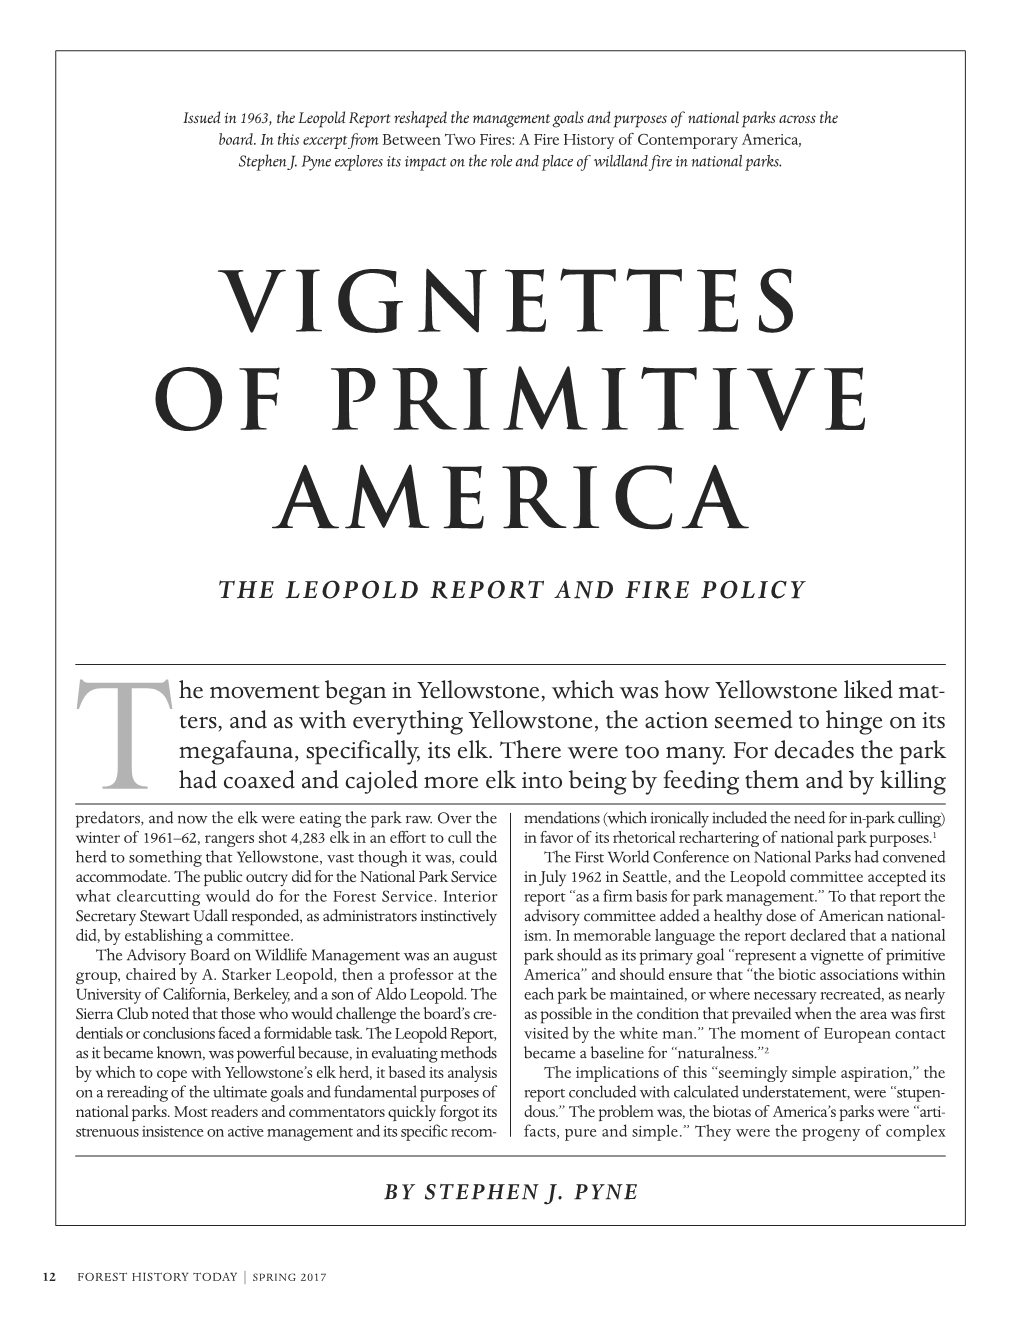 Vignettes of Primitive America: the Leopold Report and Fire Policy